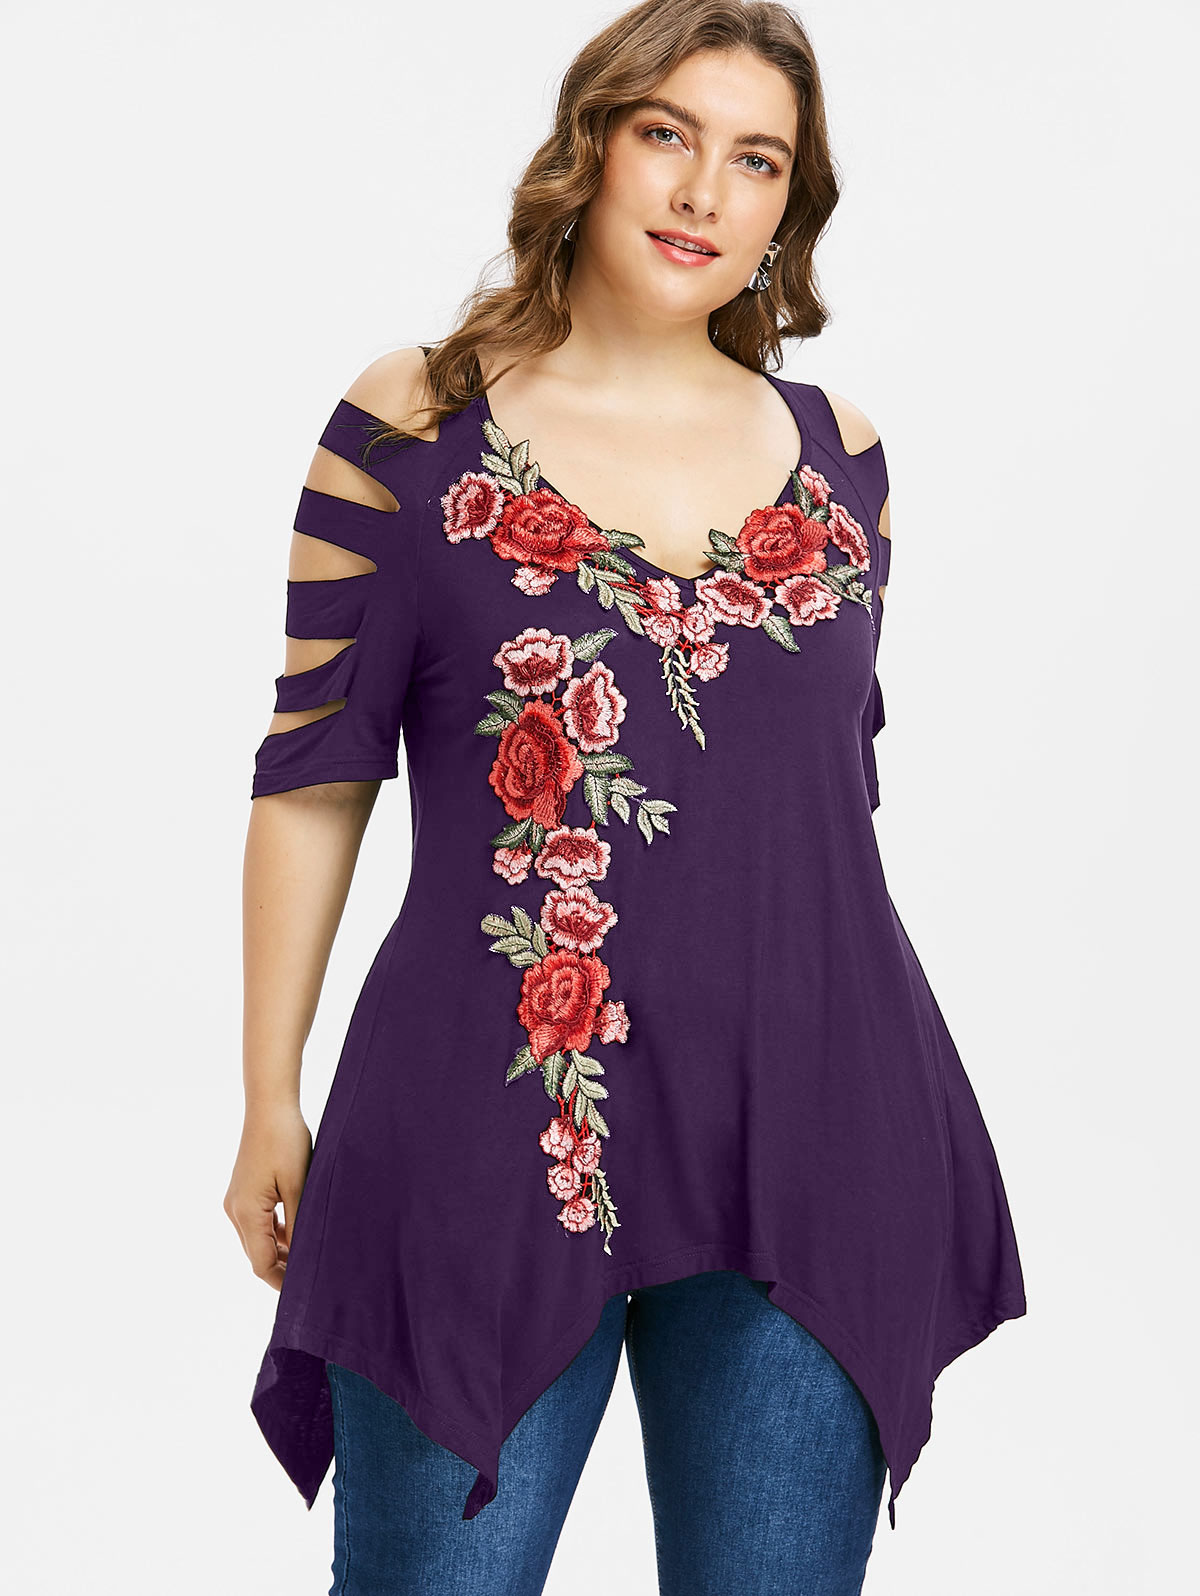 Plus Size Cut Embroidery Top For Women - Fashion Design Store